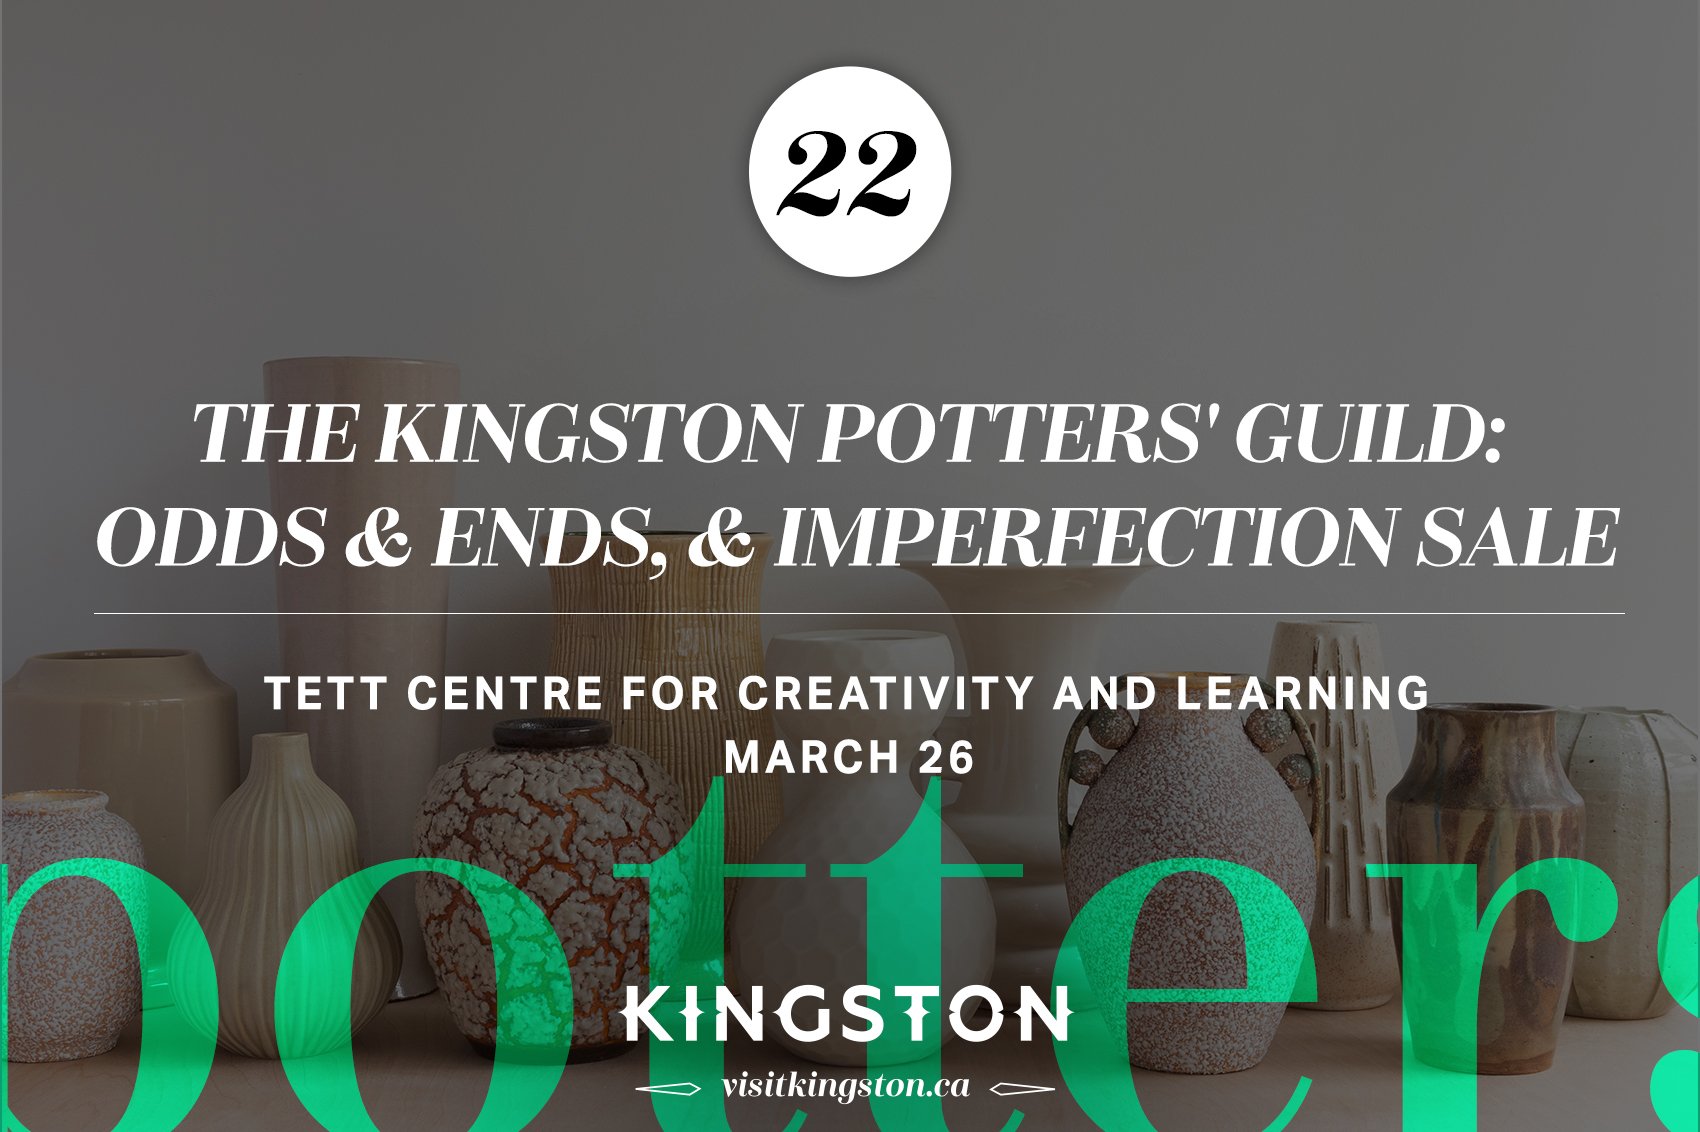 The Kingston Potters' Guild: Odds & Ends, & Imperfection Sale